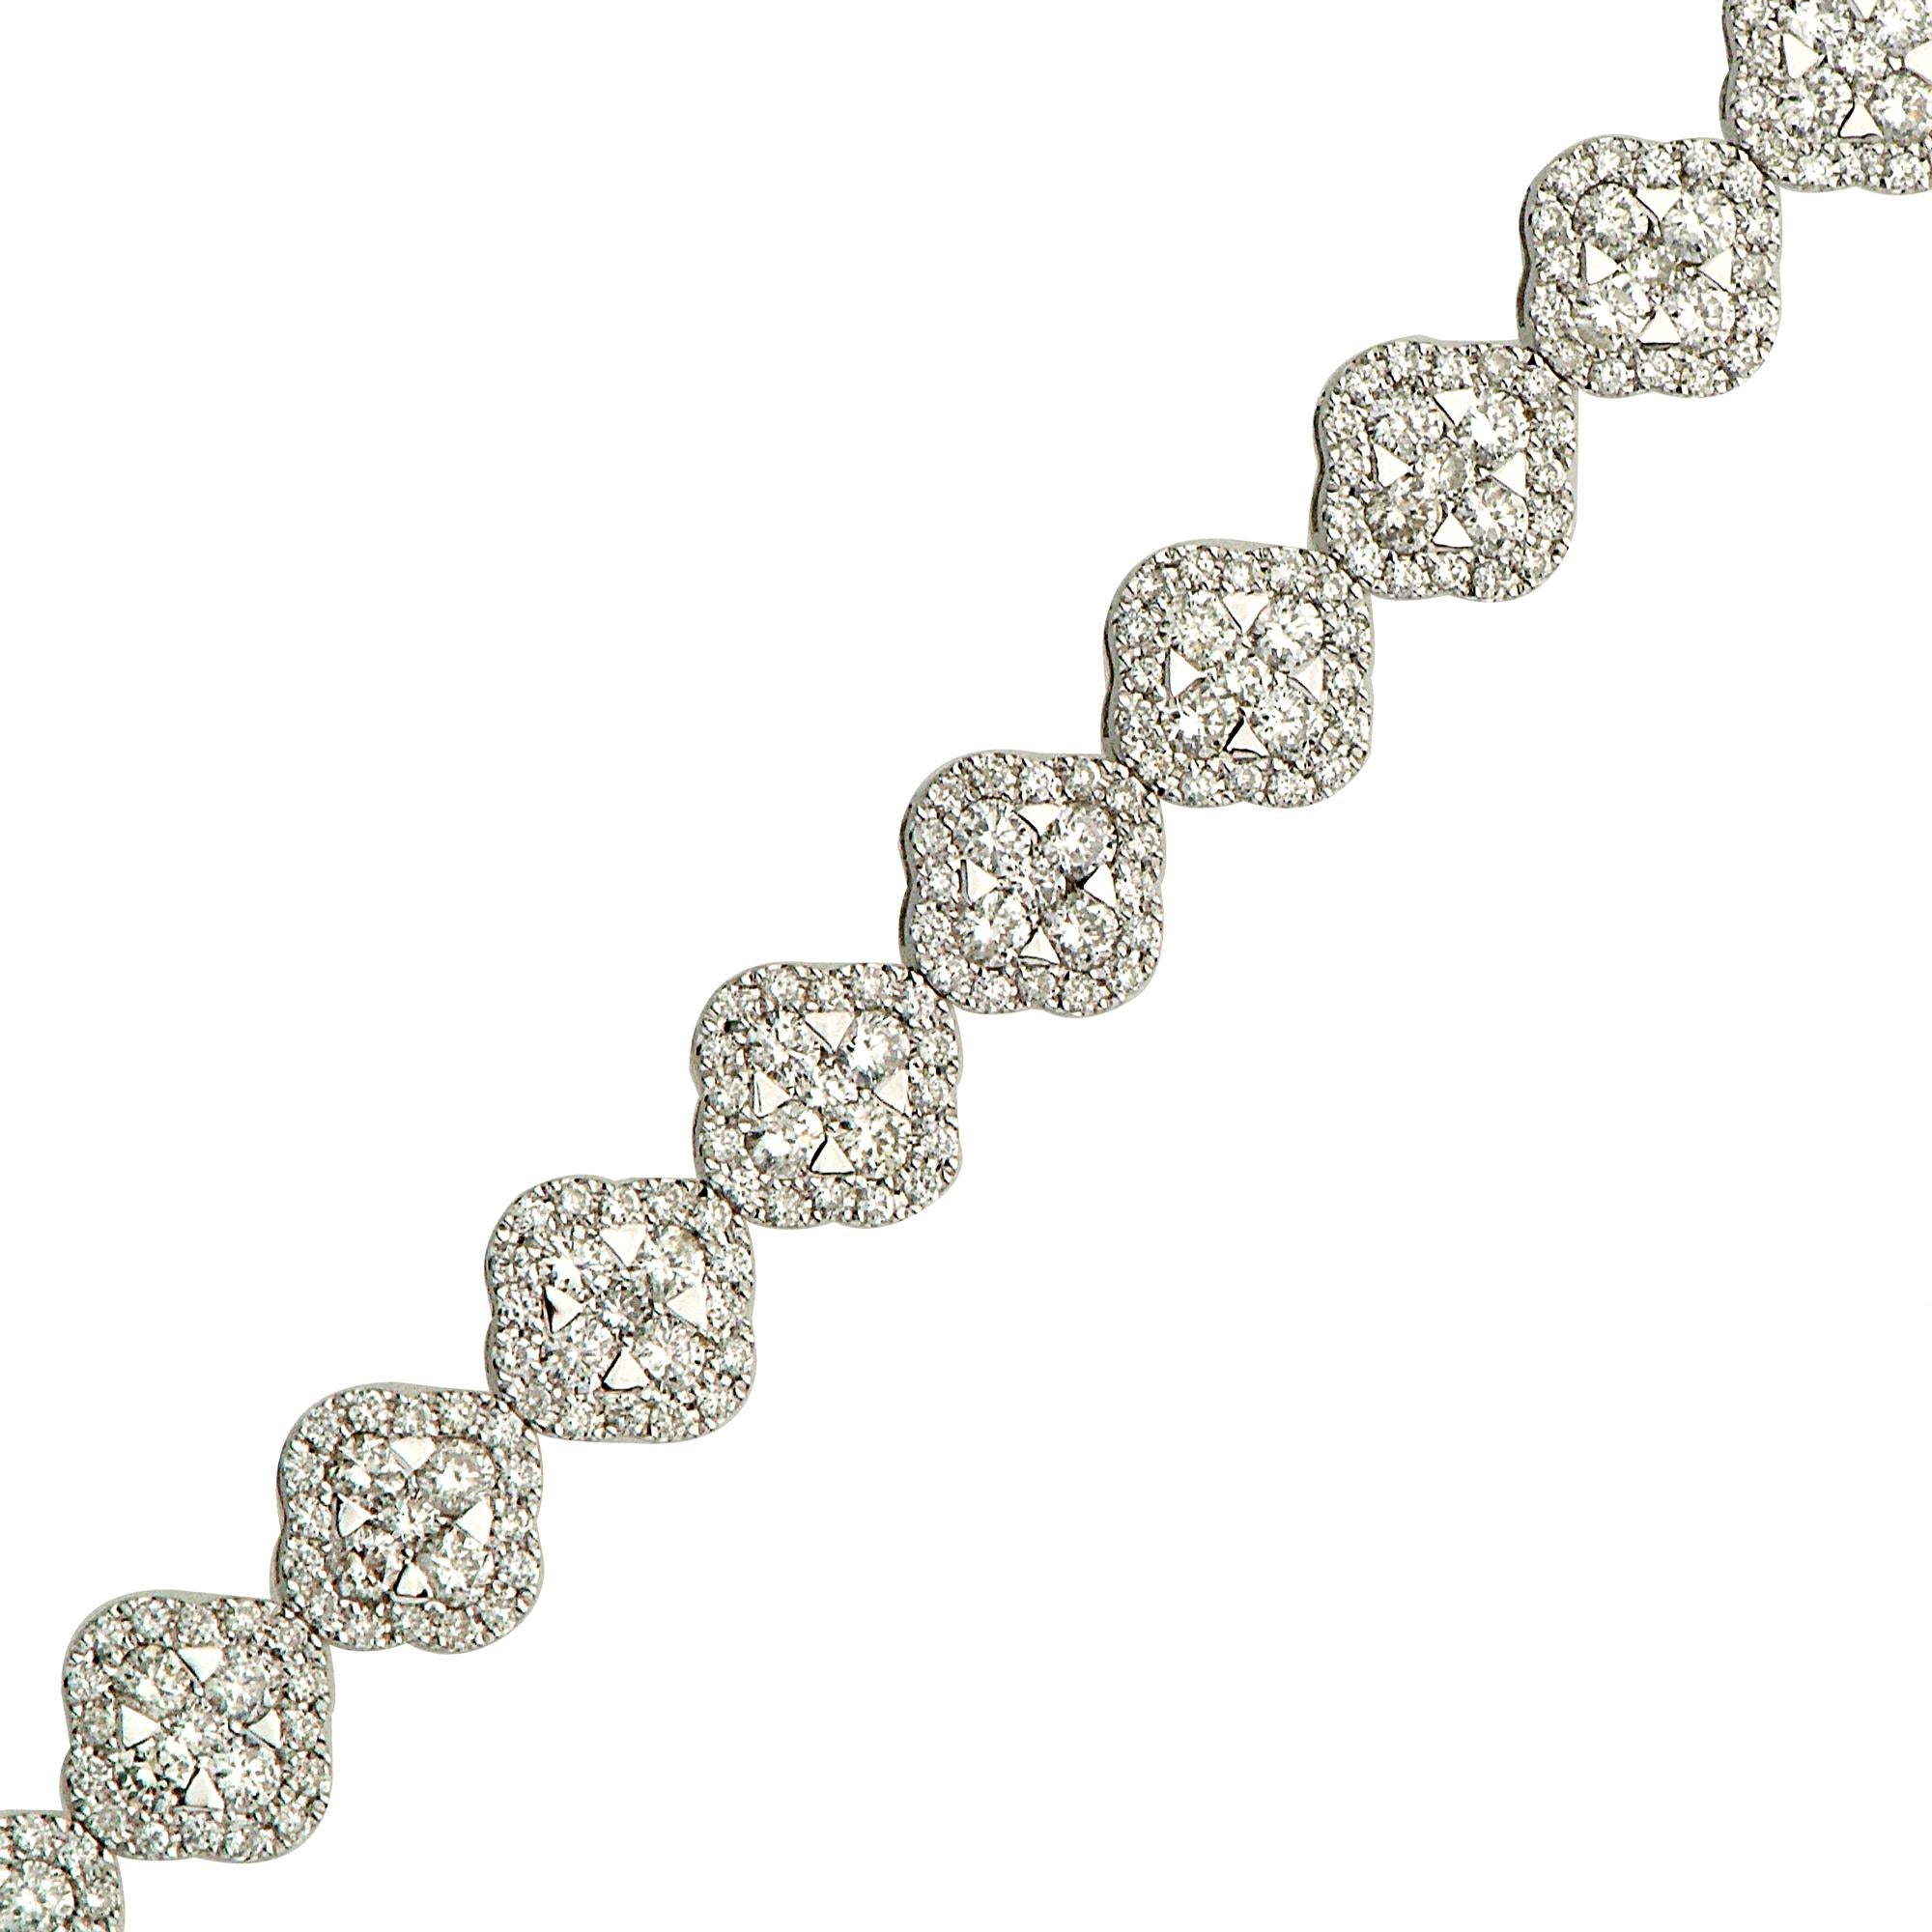 This 18 karat white gold bracelet has a total of 570 round VS2, G color diamonds to add a special detail to the clover shape they create. The 24 grams of gold expertly join together and enhance the 5.34 carats of diamonds to create a special and